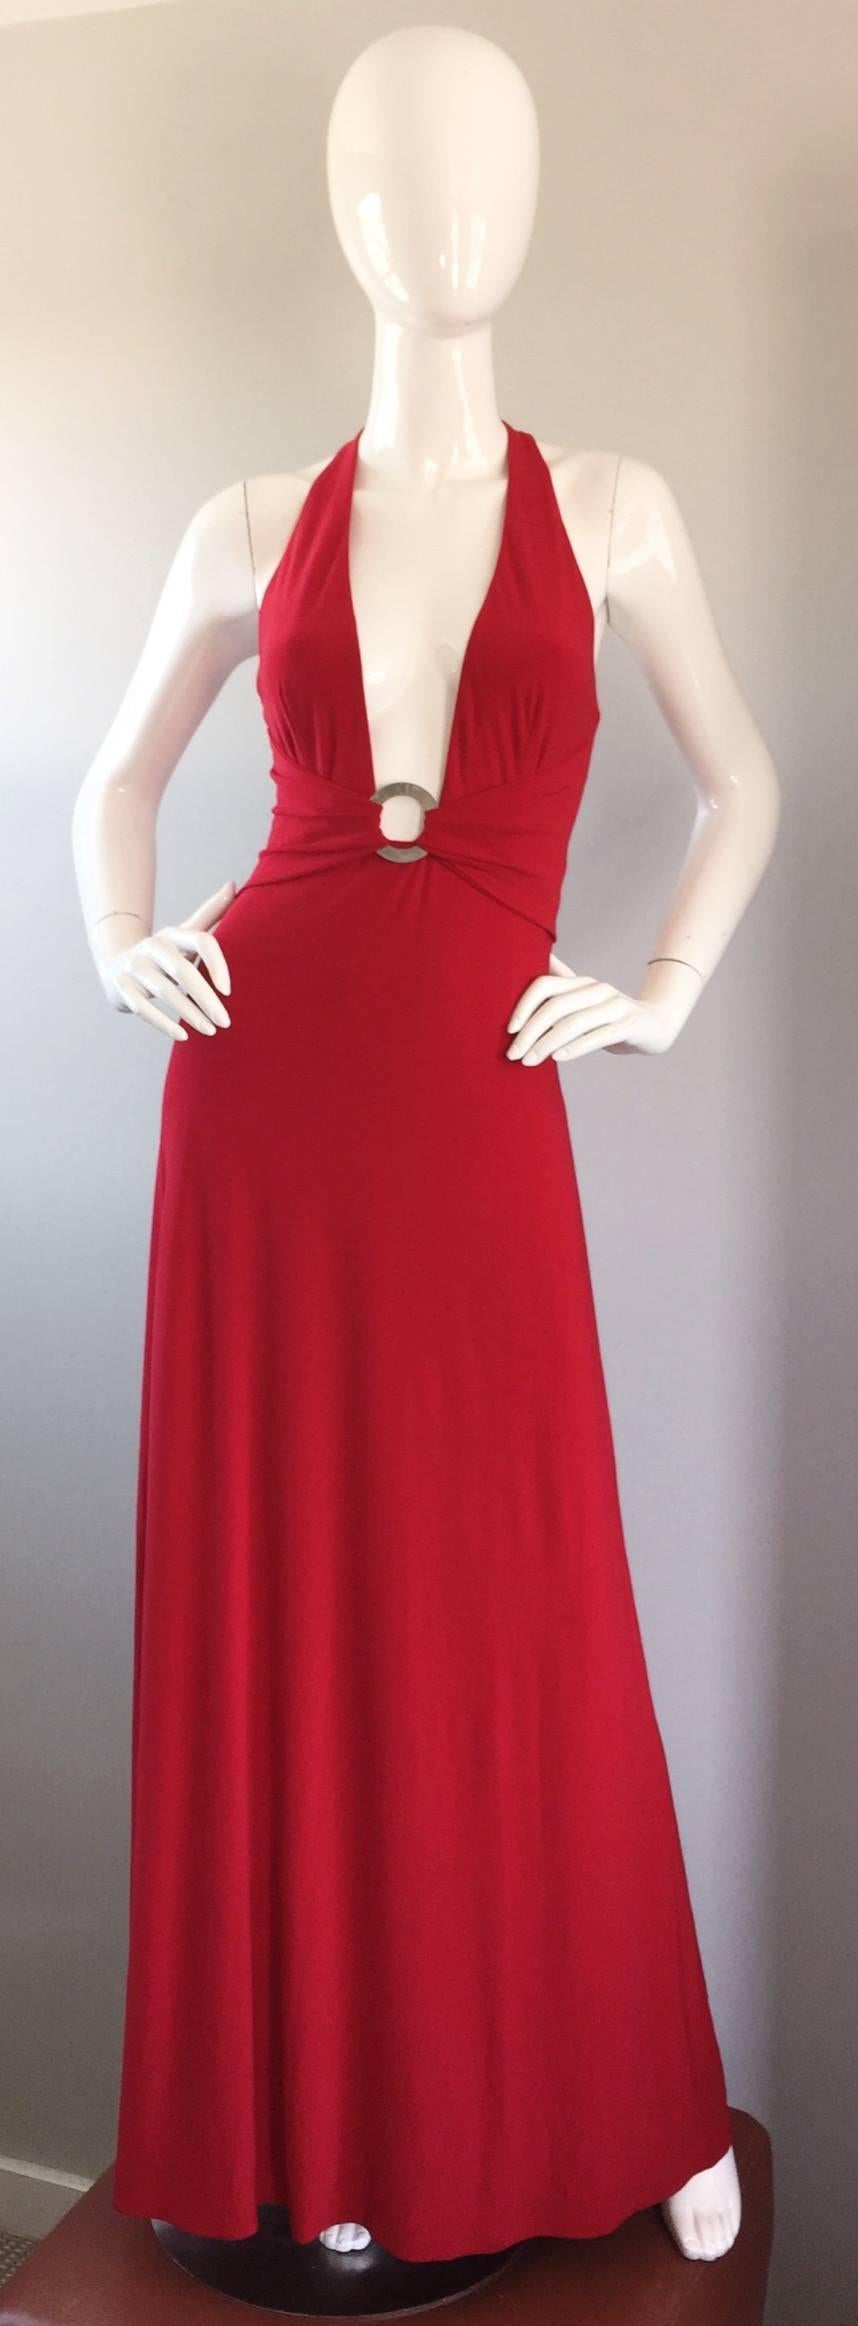 Sexiest vintage LILLIE RUBIN red gown, with a daring plunge! Looks sensational on! Features a matted silver nickel loop below bust. Comfortable, yet extremely flattering 2-ply high quality jersey. A definite head turner! In great condition. Made in